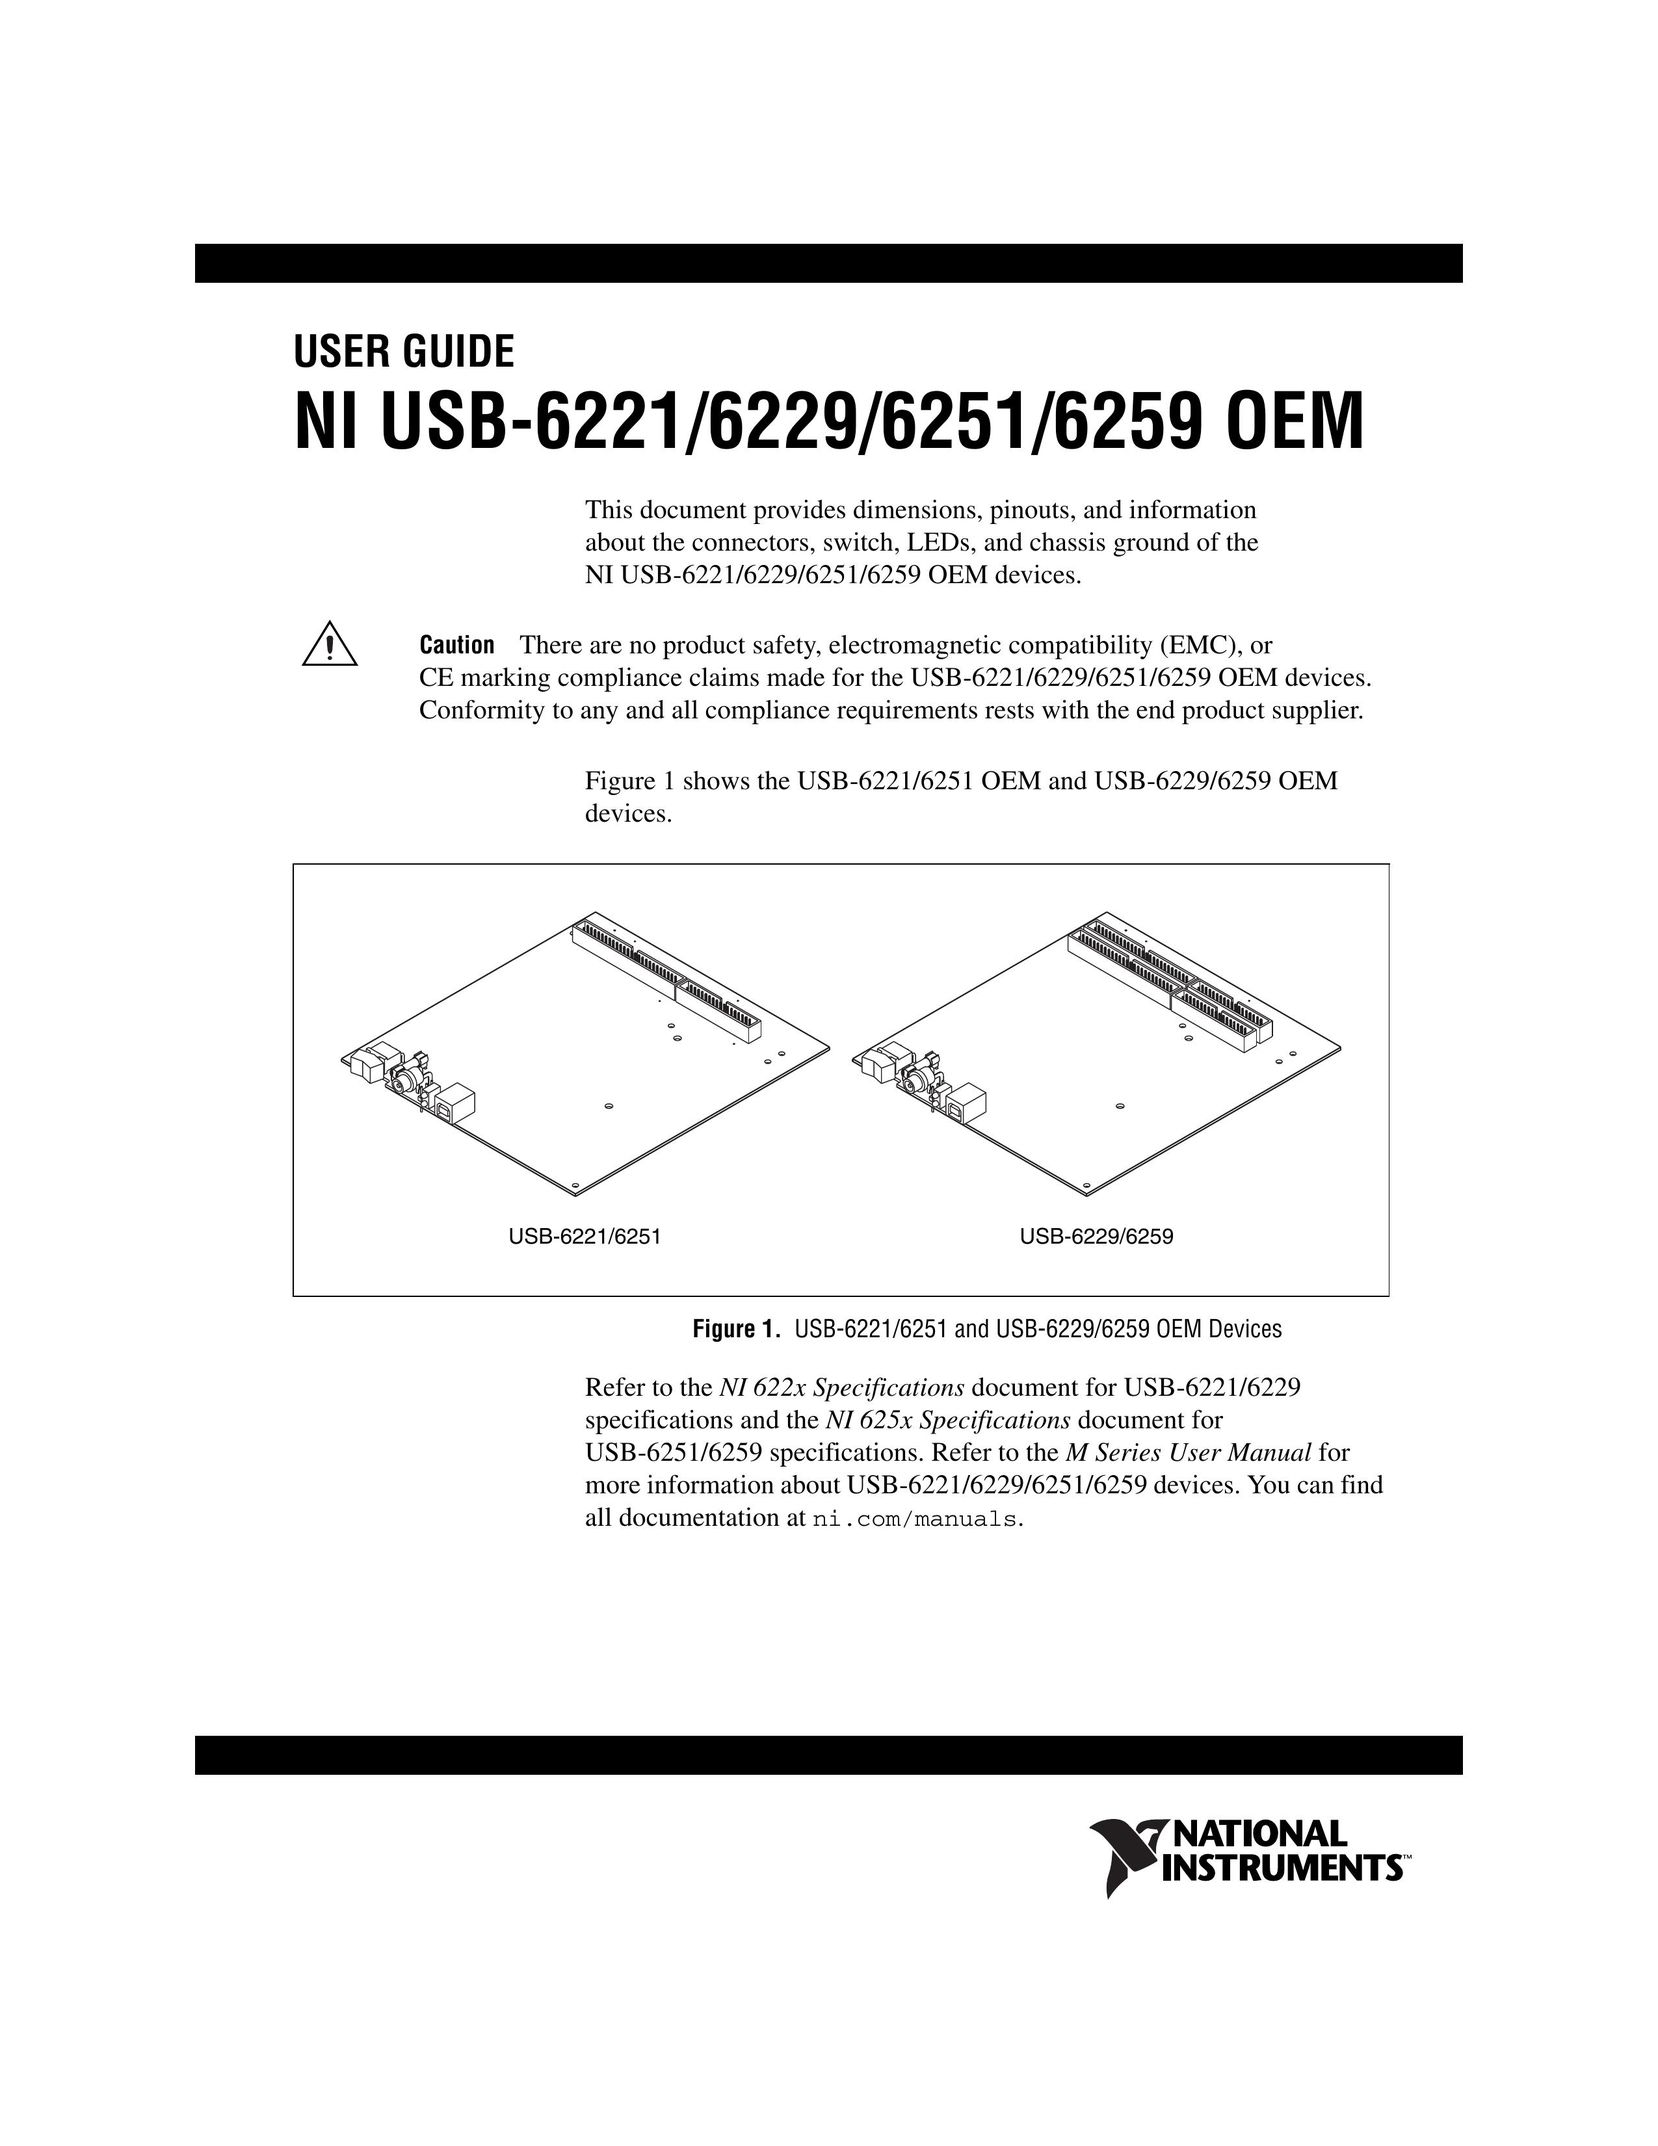 National Instruments NI USB-6259 Switch User Manual